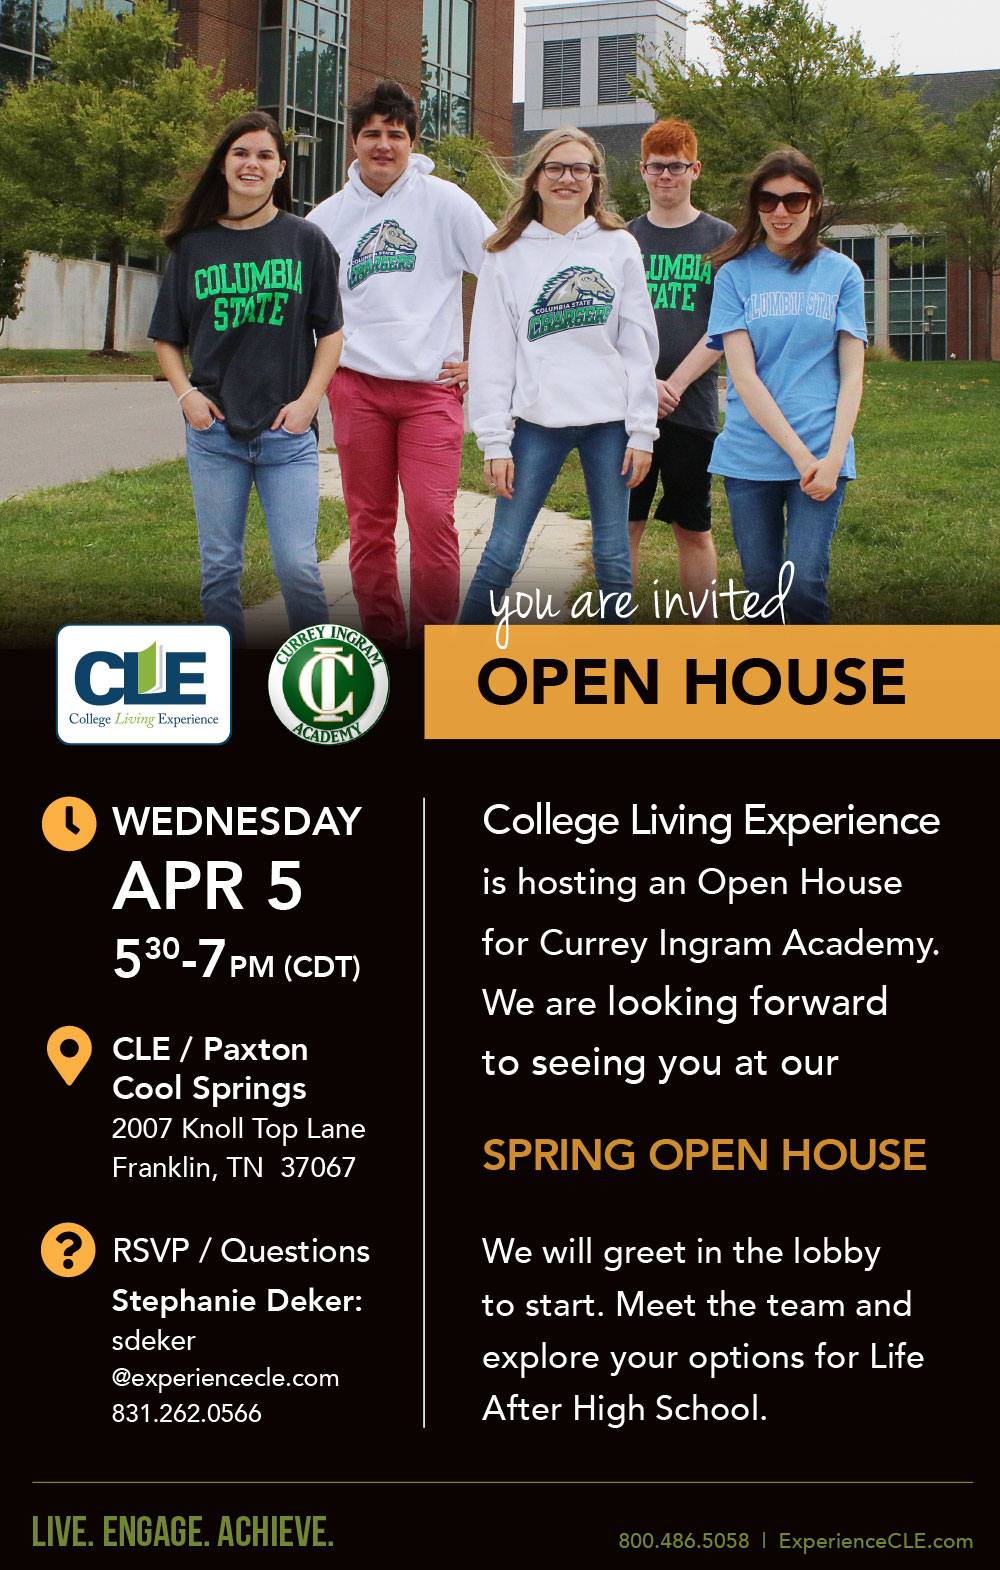 CLE Nashville Social and Open House For Currey Ingram Academy